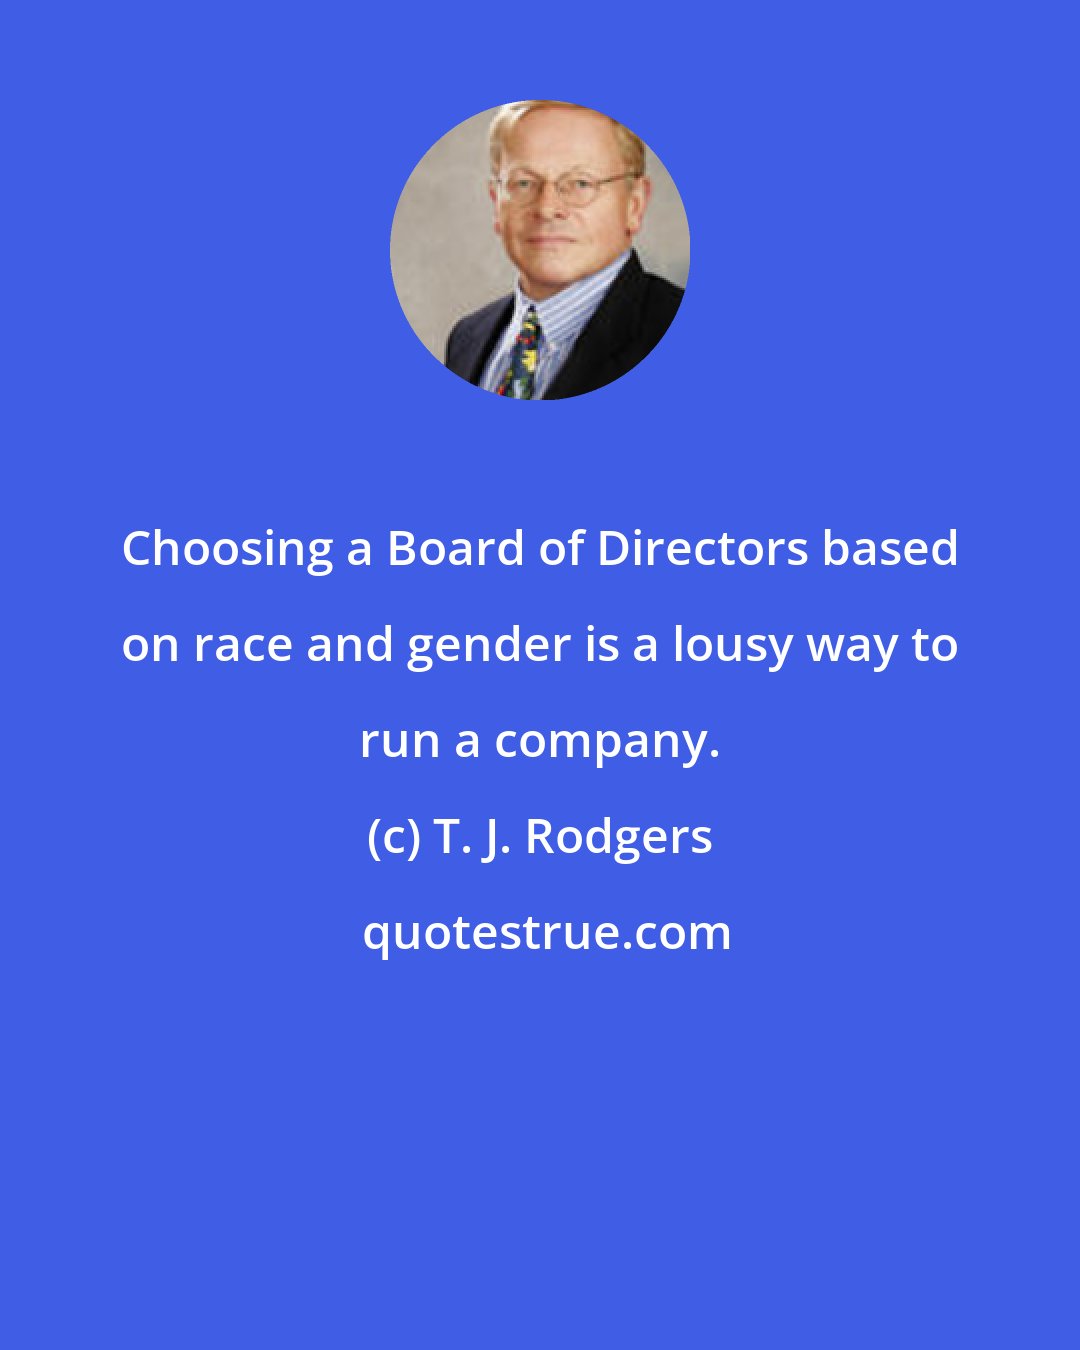 T. J. Rodgers: Choosing a Board of Directors based on race and gender is a lousy way to run a company.